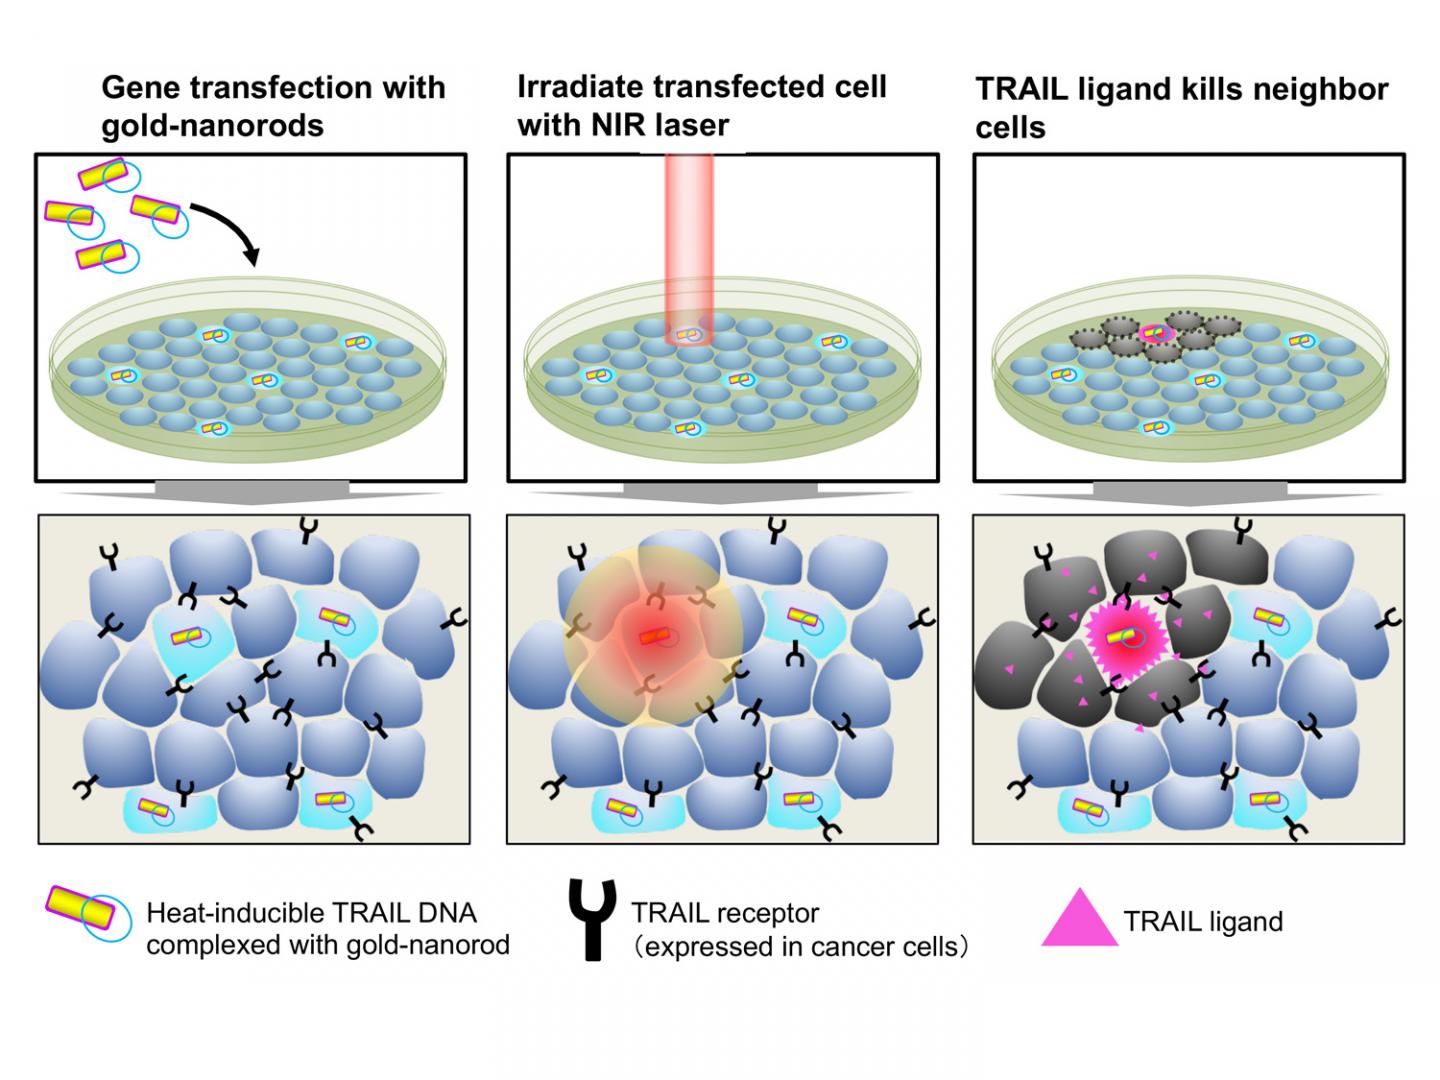 Gold nanorods carrying the heat-inducible TRAIL gene are transfected into cancer cells. Cancer cells express TRAIL receptors while normal cells do not. Illumination by a near-infrared laser warms gold nanorods and induces TRAIL expression in transfected cells. TRAIL then kills the surrounding cancer cells. [Kyoto University iCeMS]